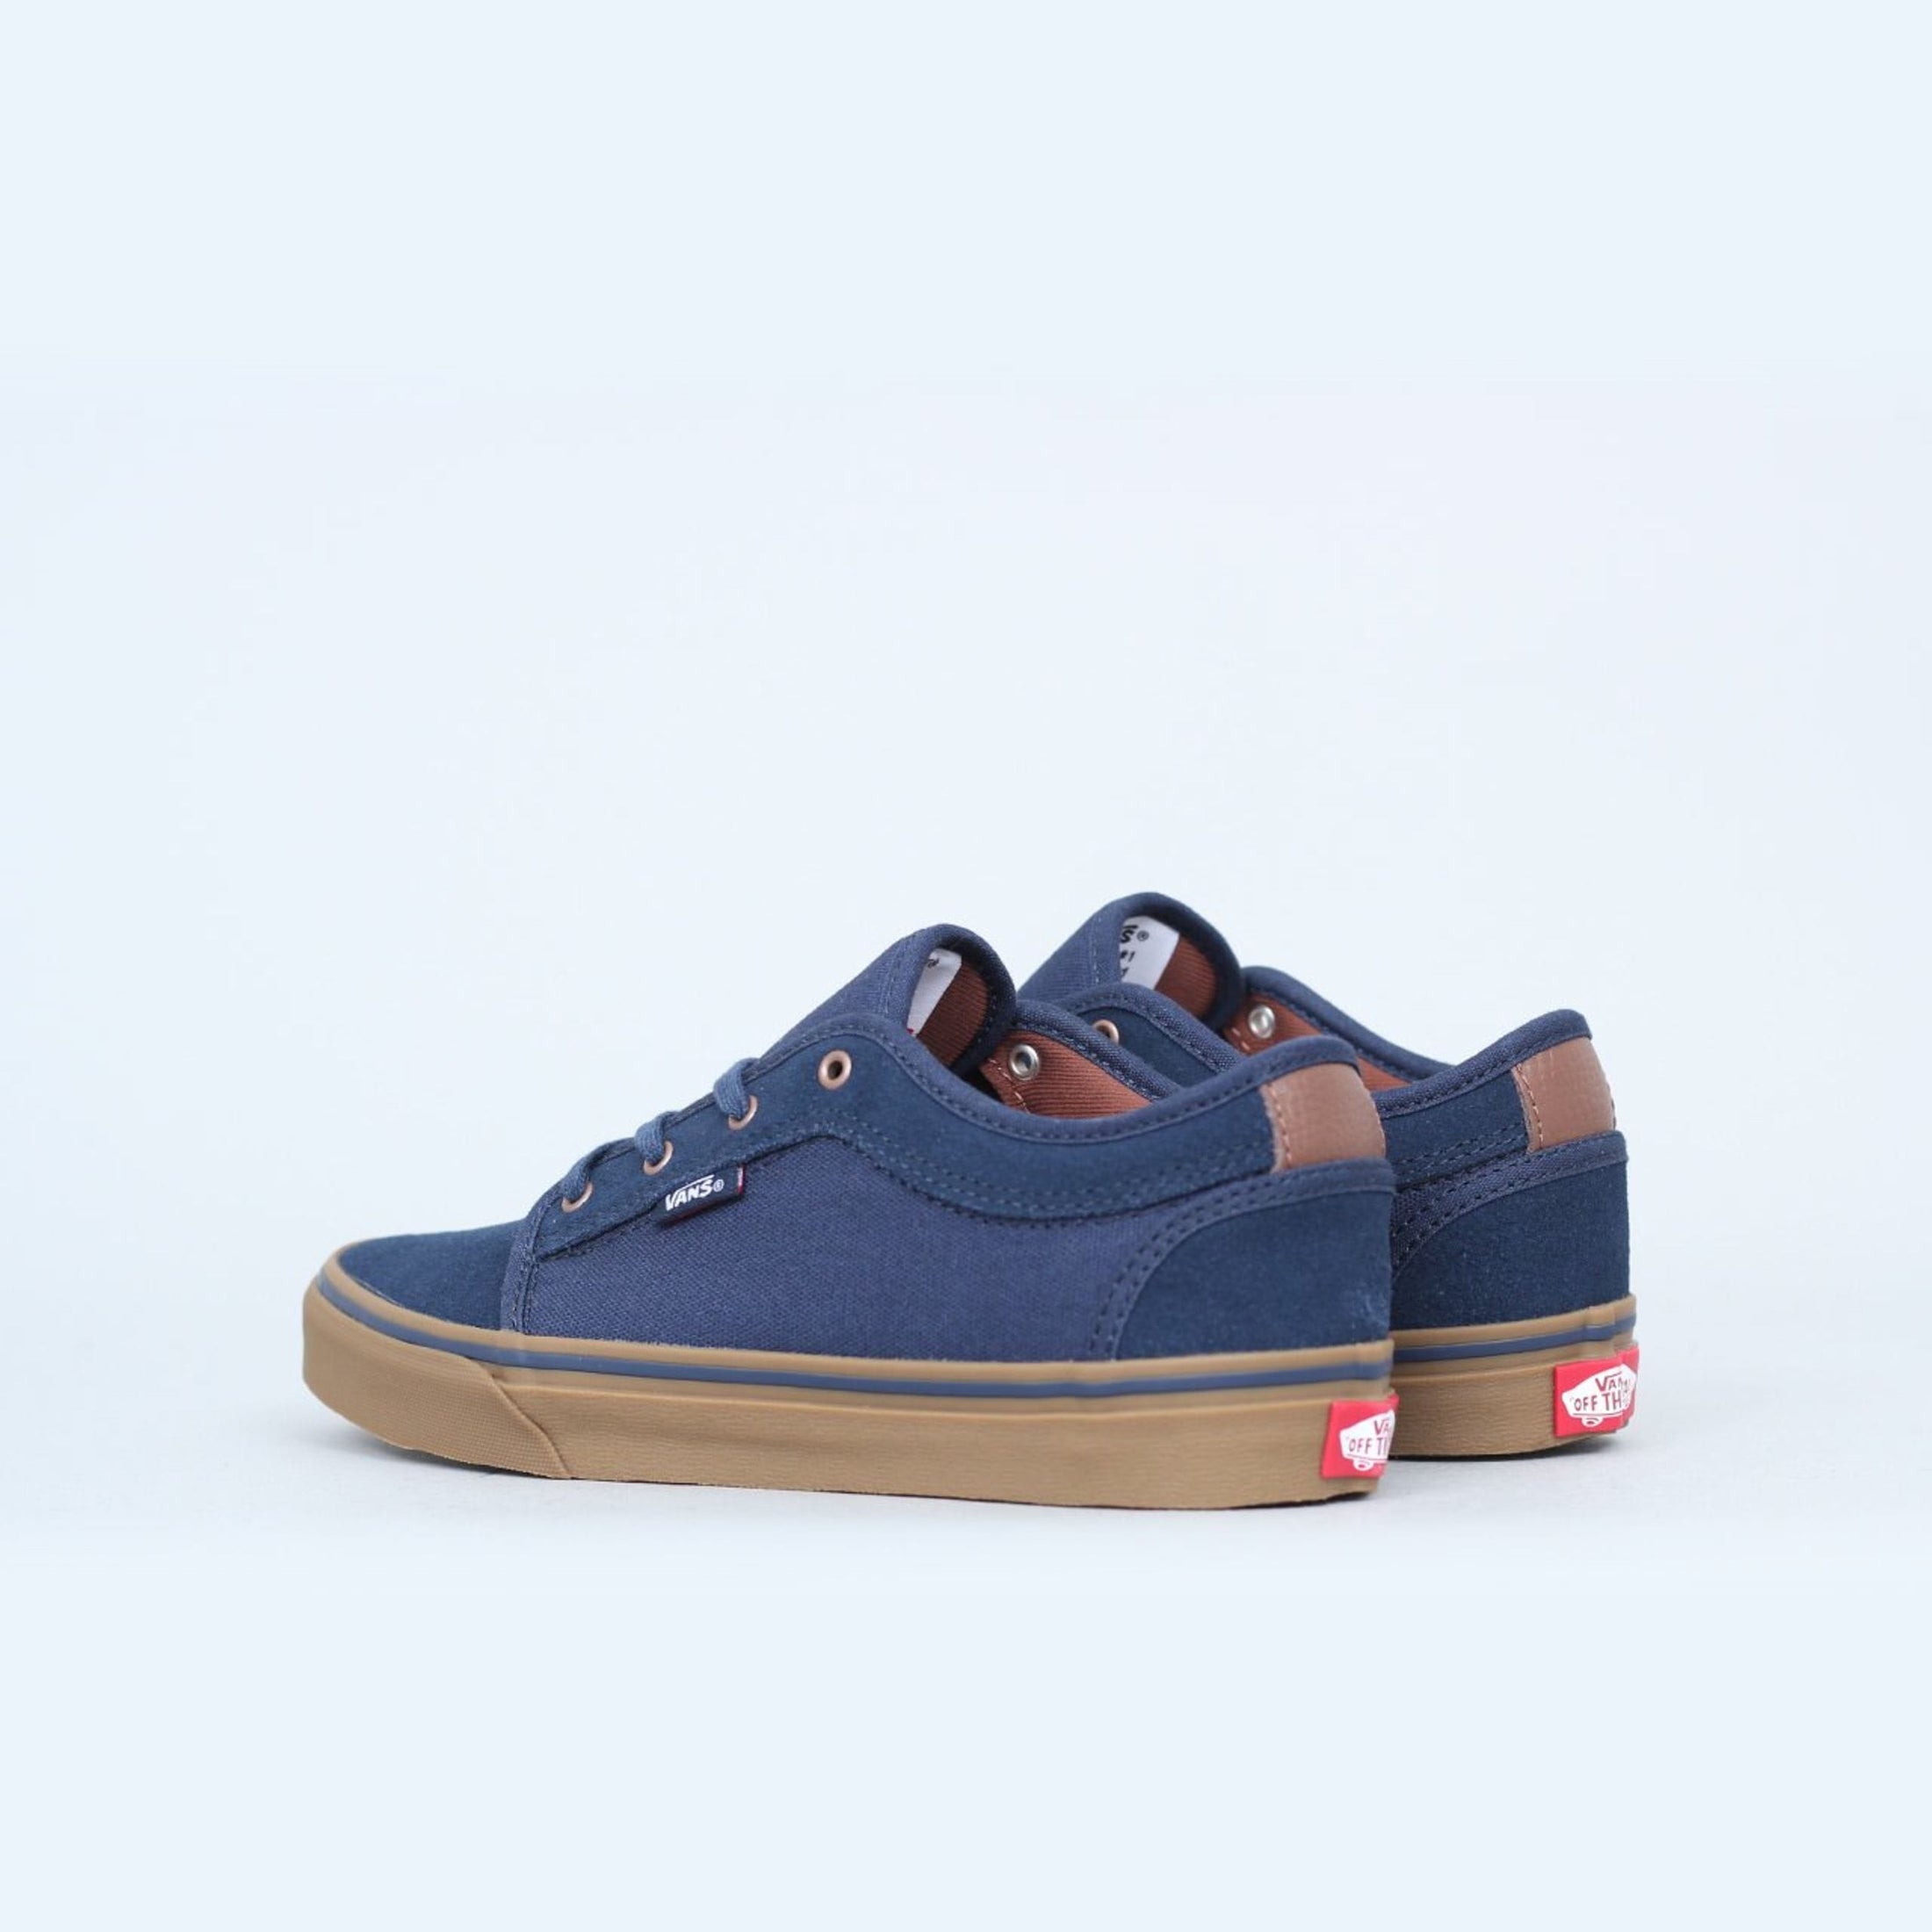 Vans Chukka Low Youth Shoes Rich Navy / Gum